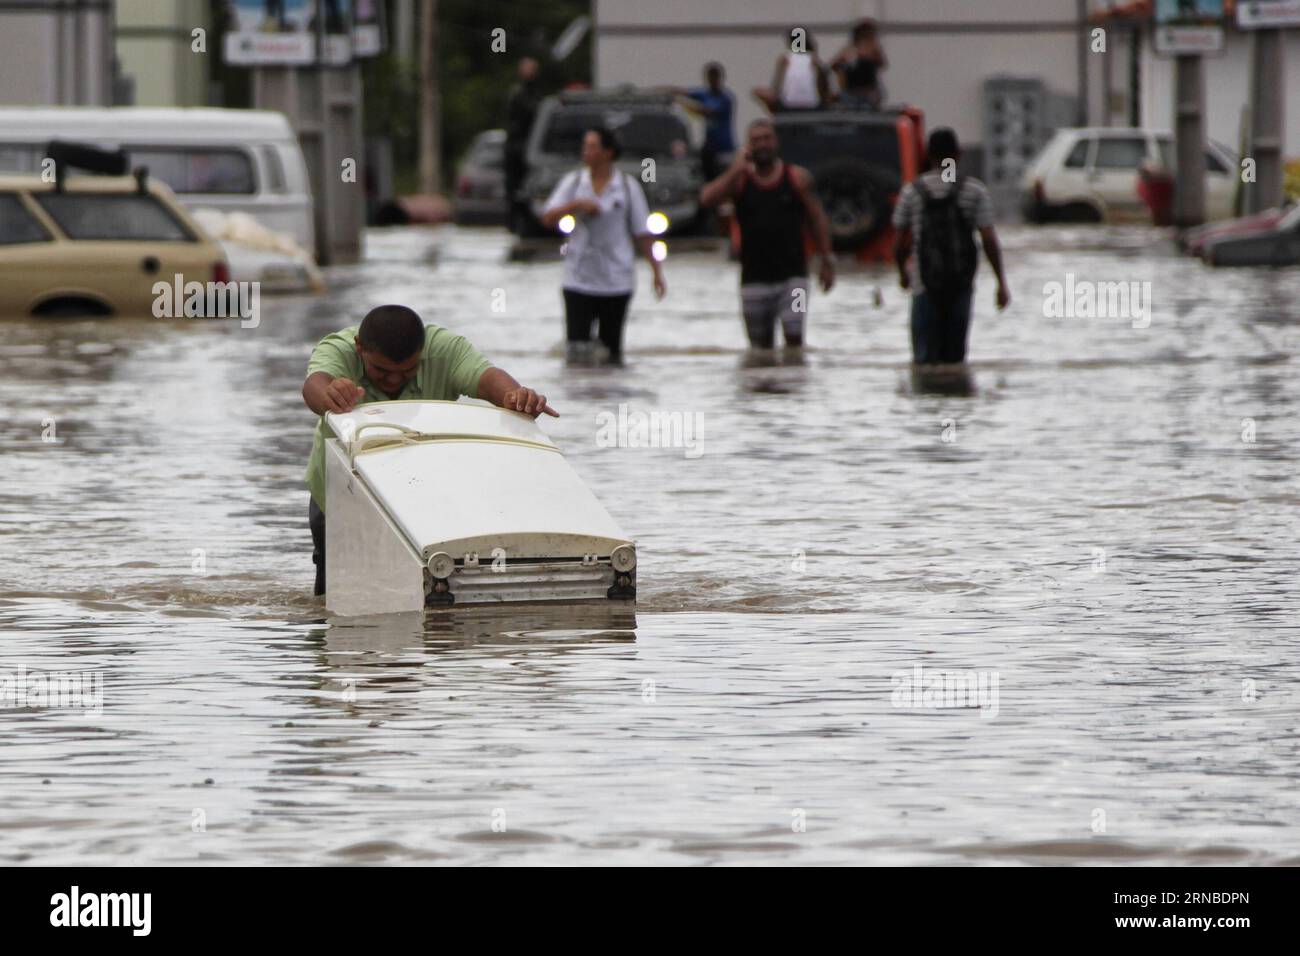 (160302) -- MARICA, March 2, 2016 -- Residents walk through flood in Itaipuacu district, Marica city, Rio de Janeiro state, Brazil, on March 2, 2016. Residents in different parts of Itaipuacu district remain stranded after the 24-hour heavy rains. Paulo Campos/AGENCIA ESTADO (jg) (sp) BRAZIL OUT BRAZIL-MARICA-ENVIRONMENT-FLOOD e AE PUBLICATIONxNOTxINxCHN   Marica March 2 2016 Residents Walk Through Flood in  District Marica City Rio de Janeiro State Brazil ON March 2 2016 Residents in different Parts of  District Remain stranded After The 24 hour Heavy Rains Paulo Campos Agencia Estado JG SP B Stock Photo